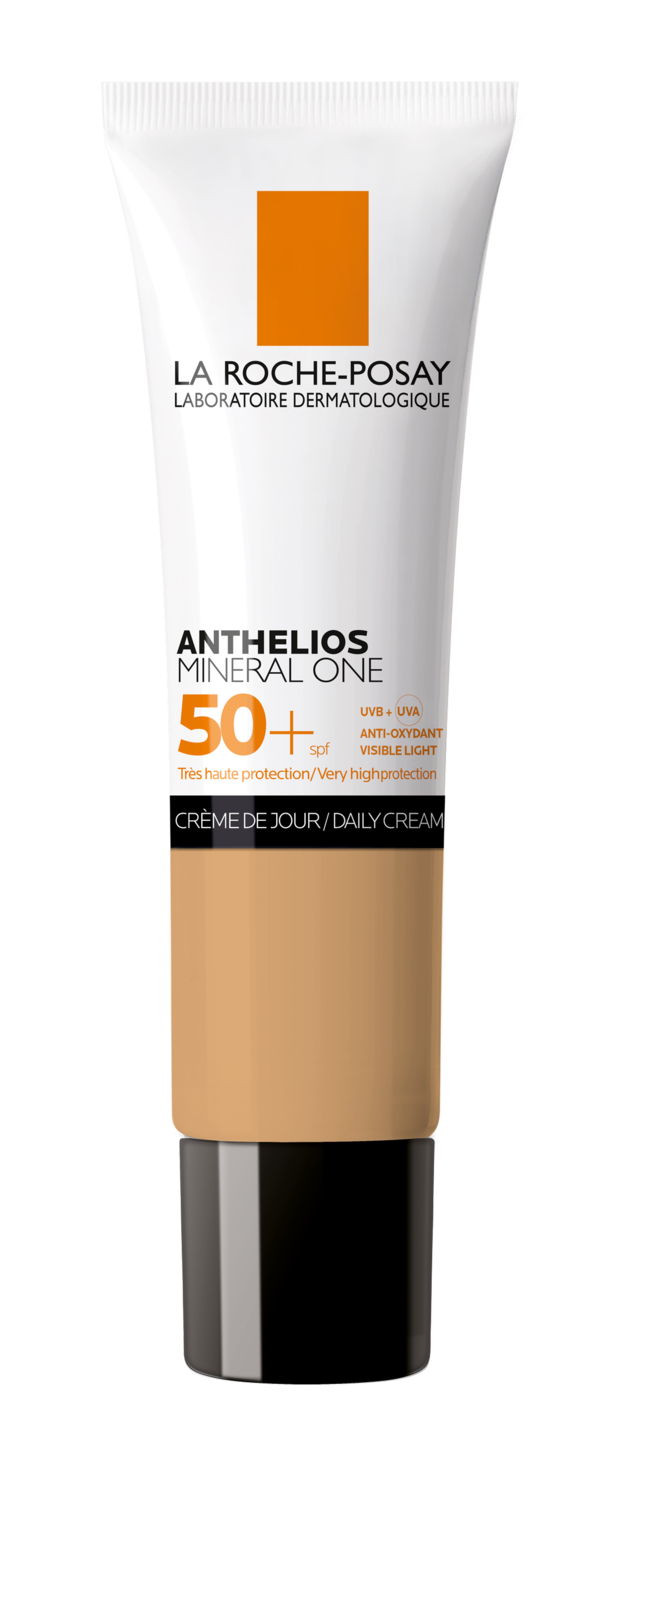 Image of La Roche-Posay Anthelios Mineral One SPF50 - Kleur 04 